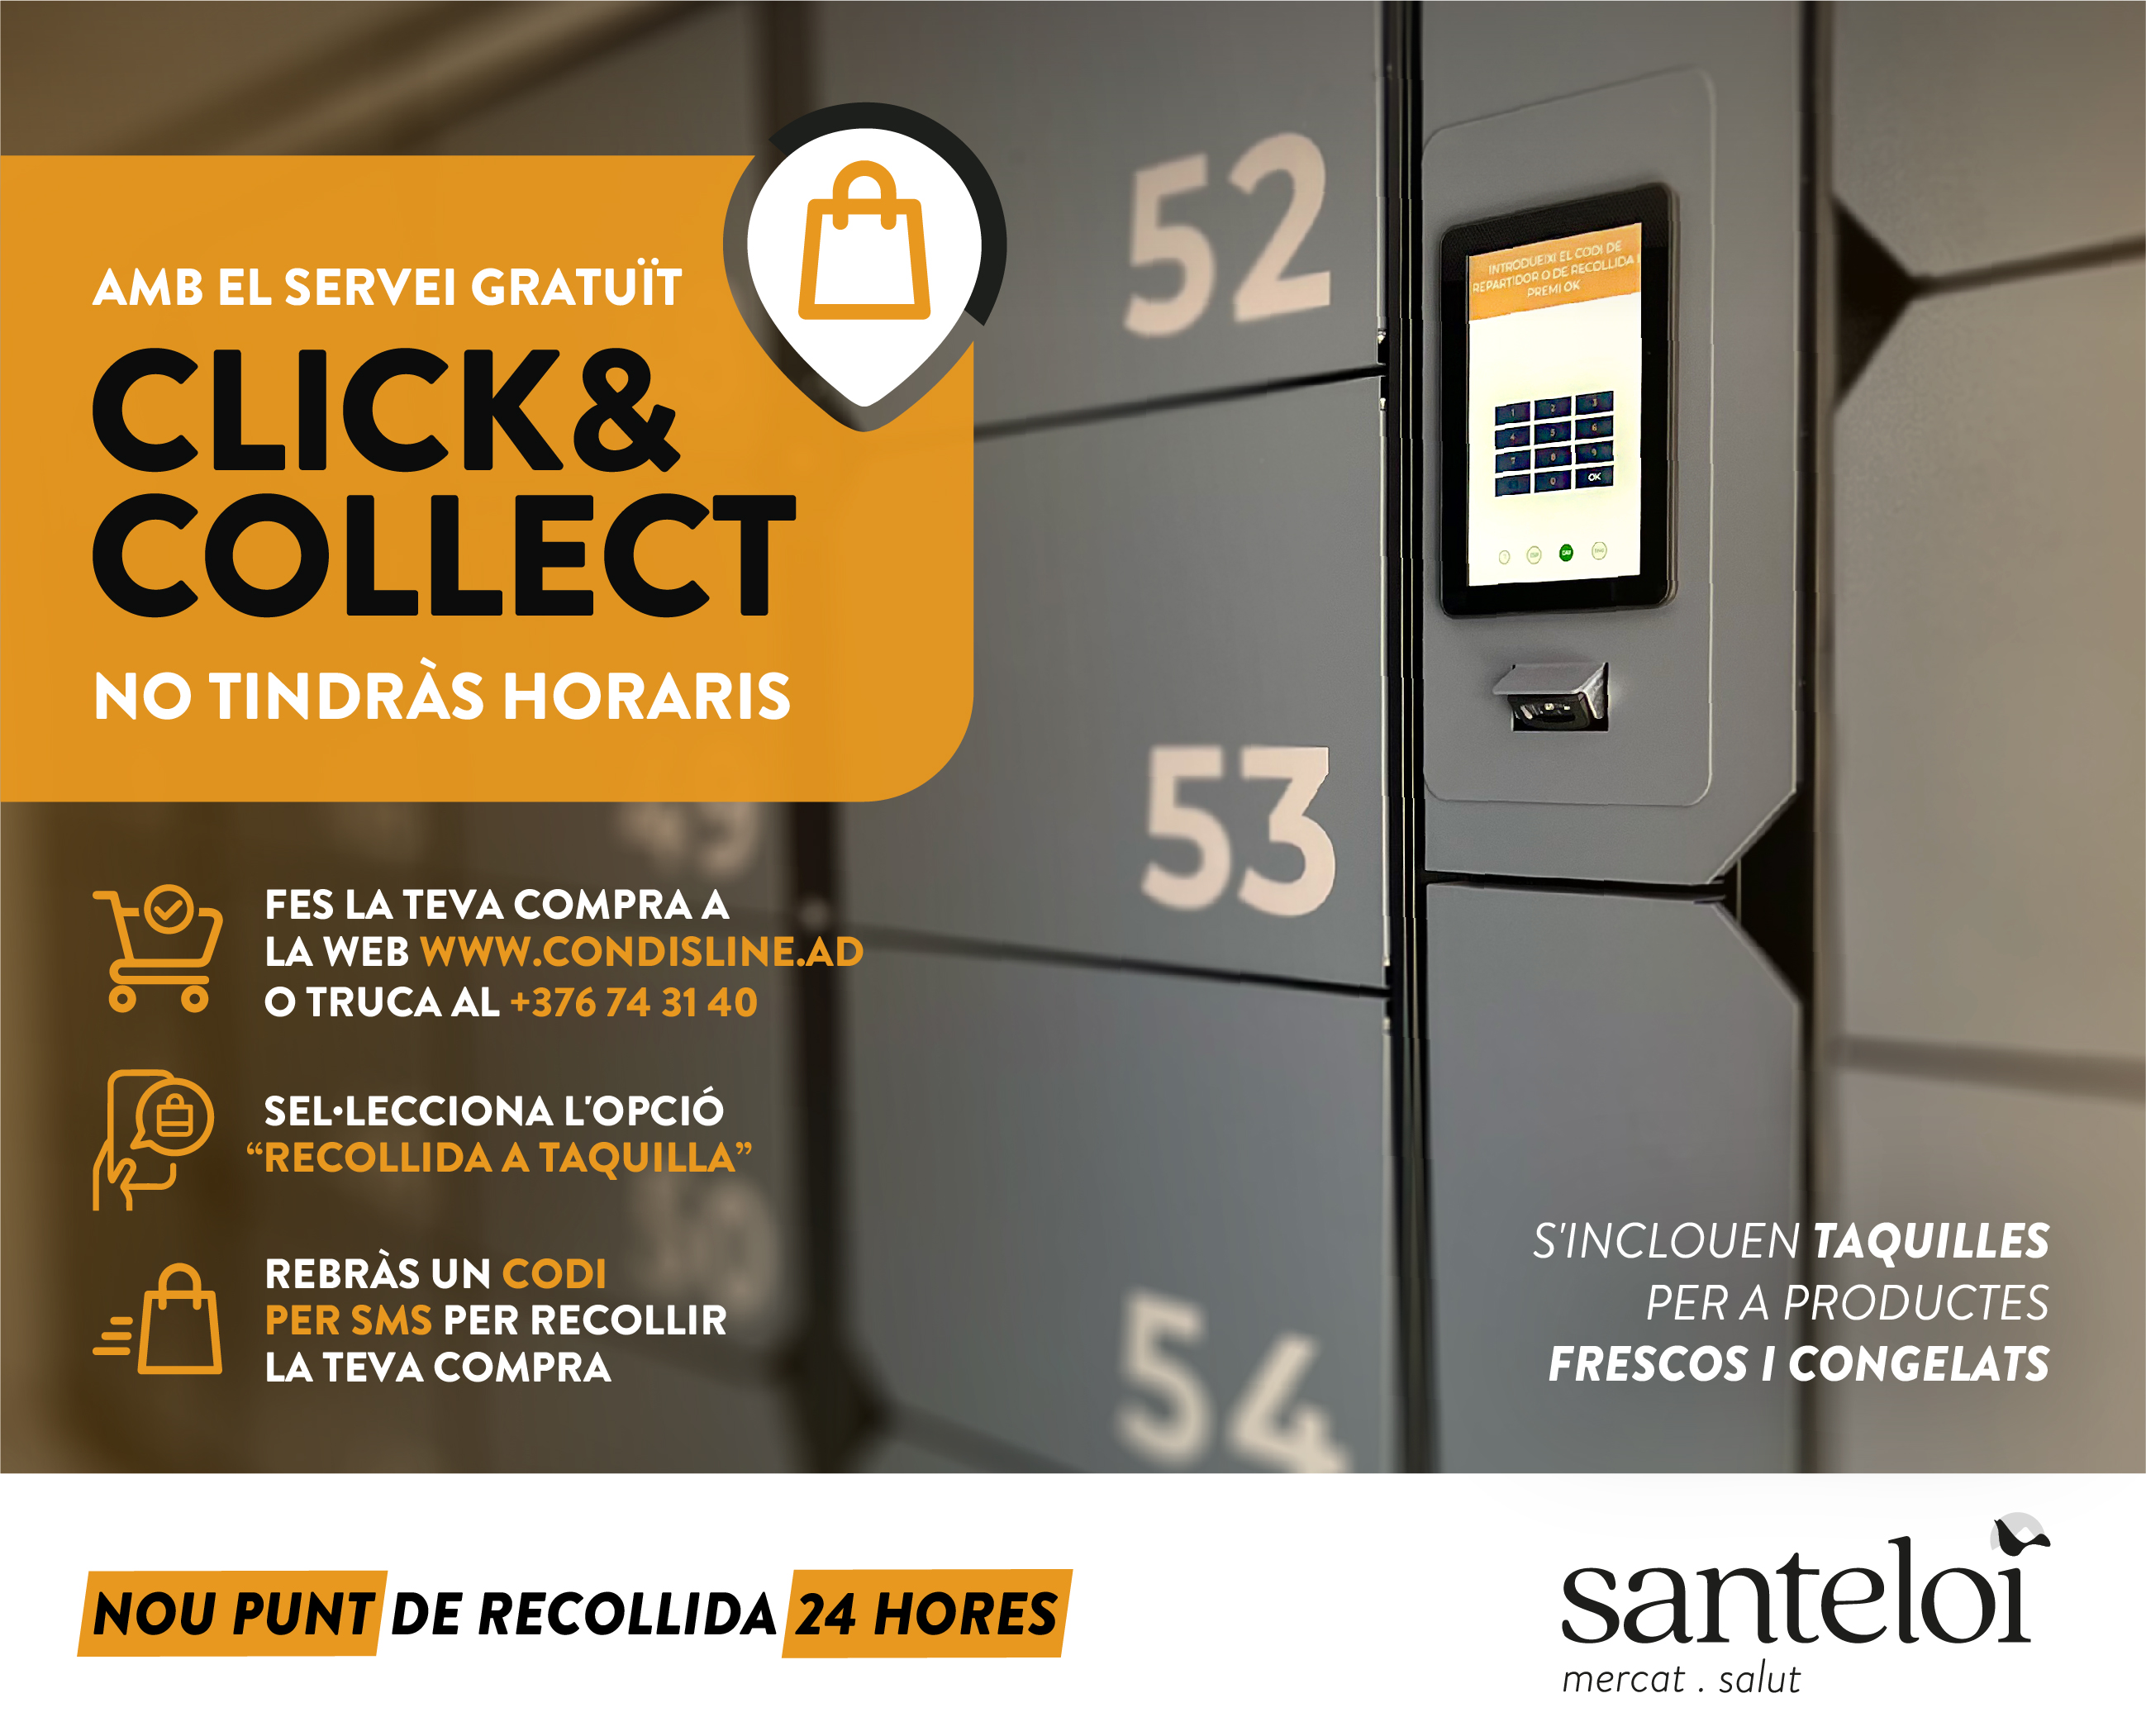 click&collect